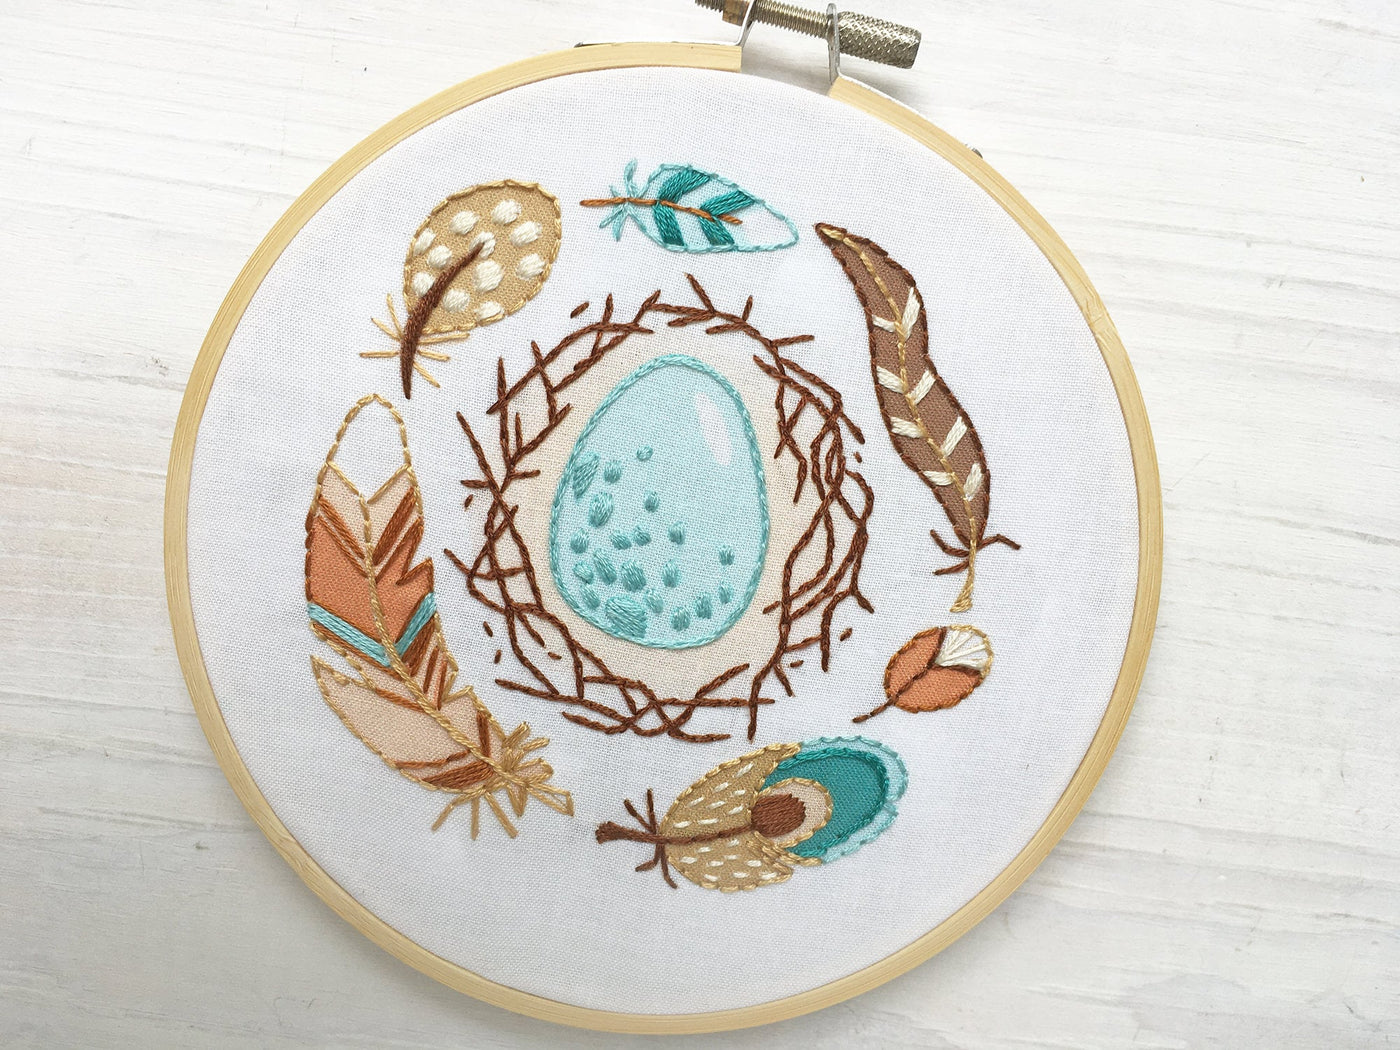 Nest and Feathers Embroidery pattern download, robin's egg nest